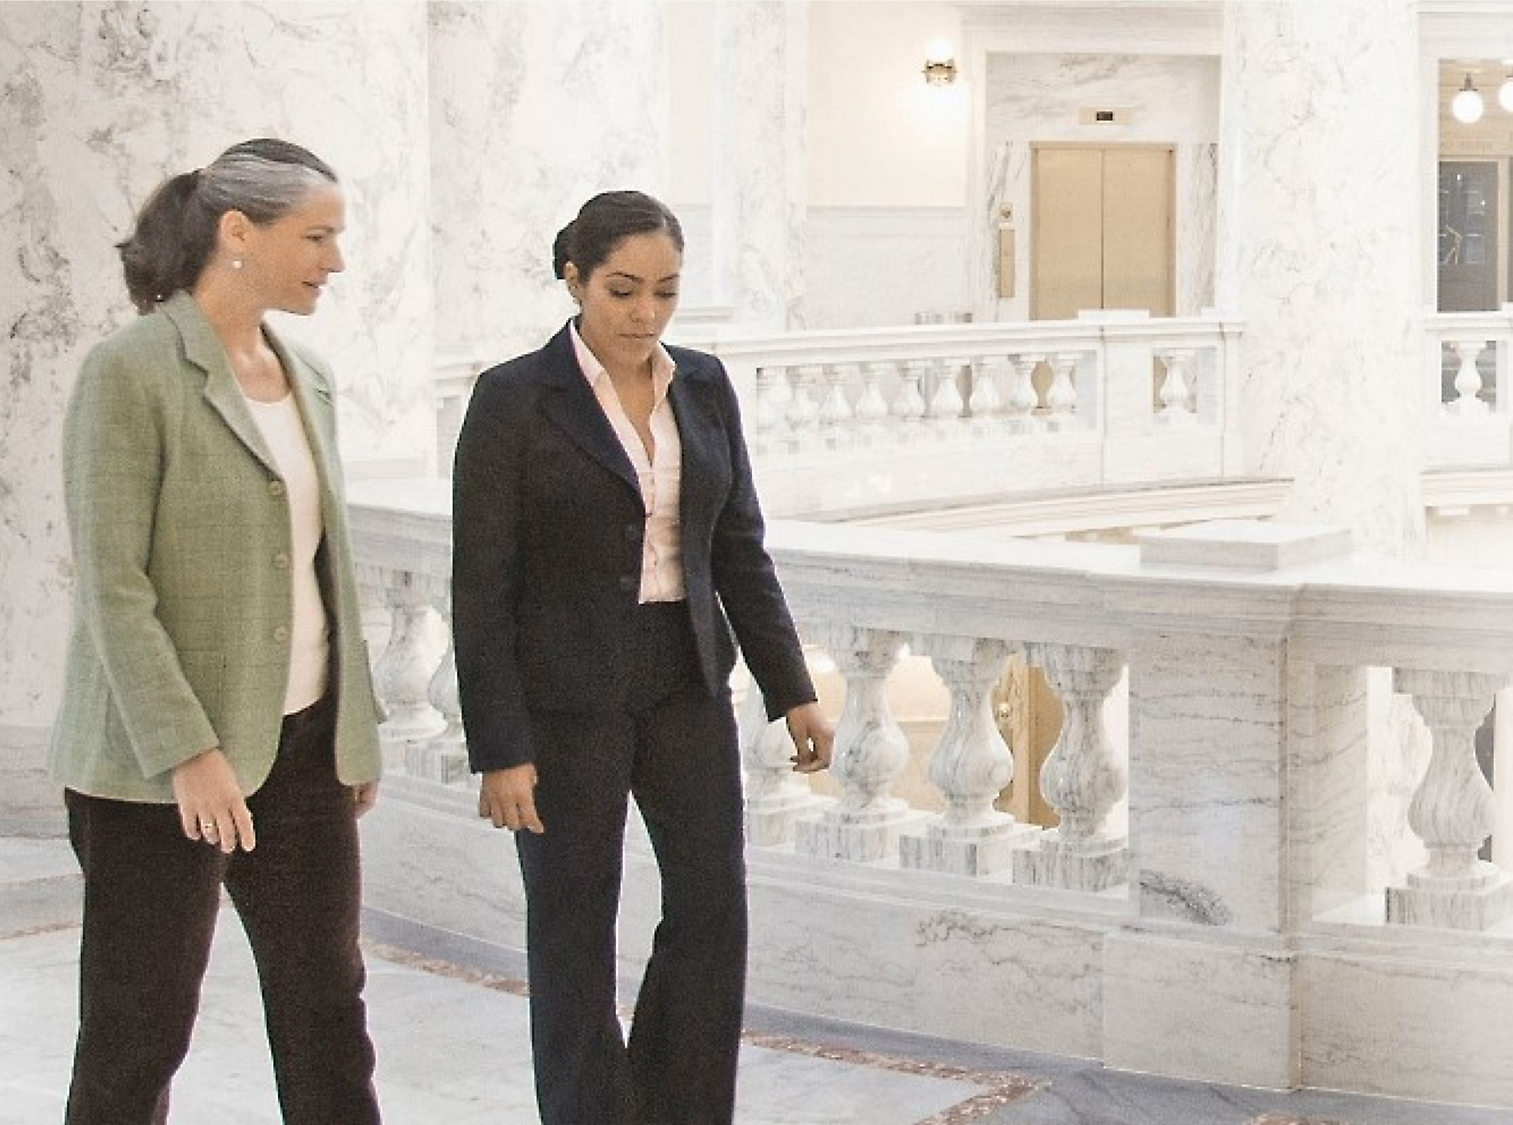 Two women walking and conversing in a marble hall with ornate balustrades in the background.